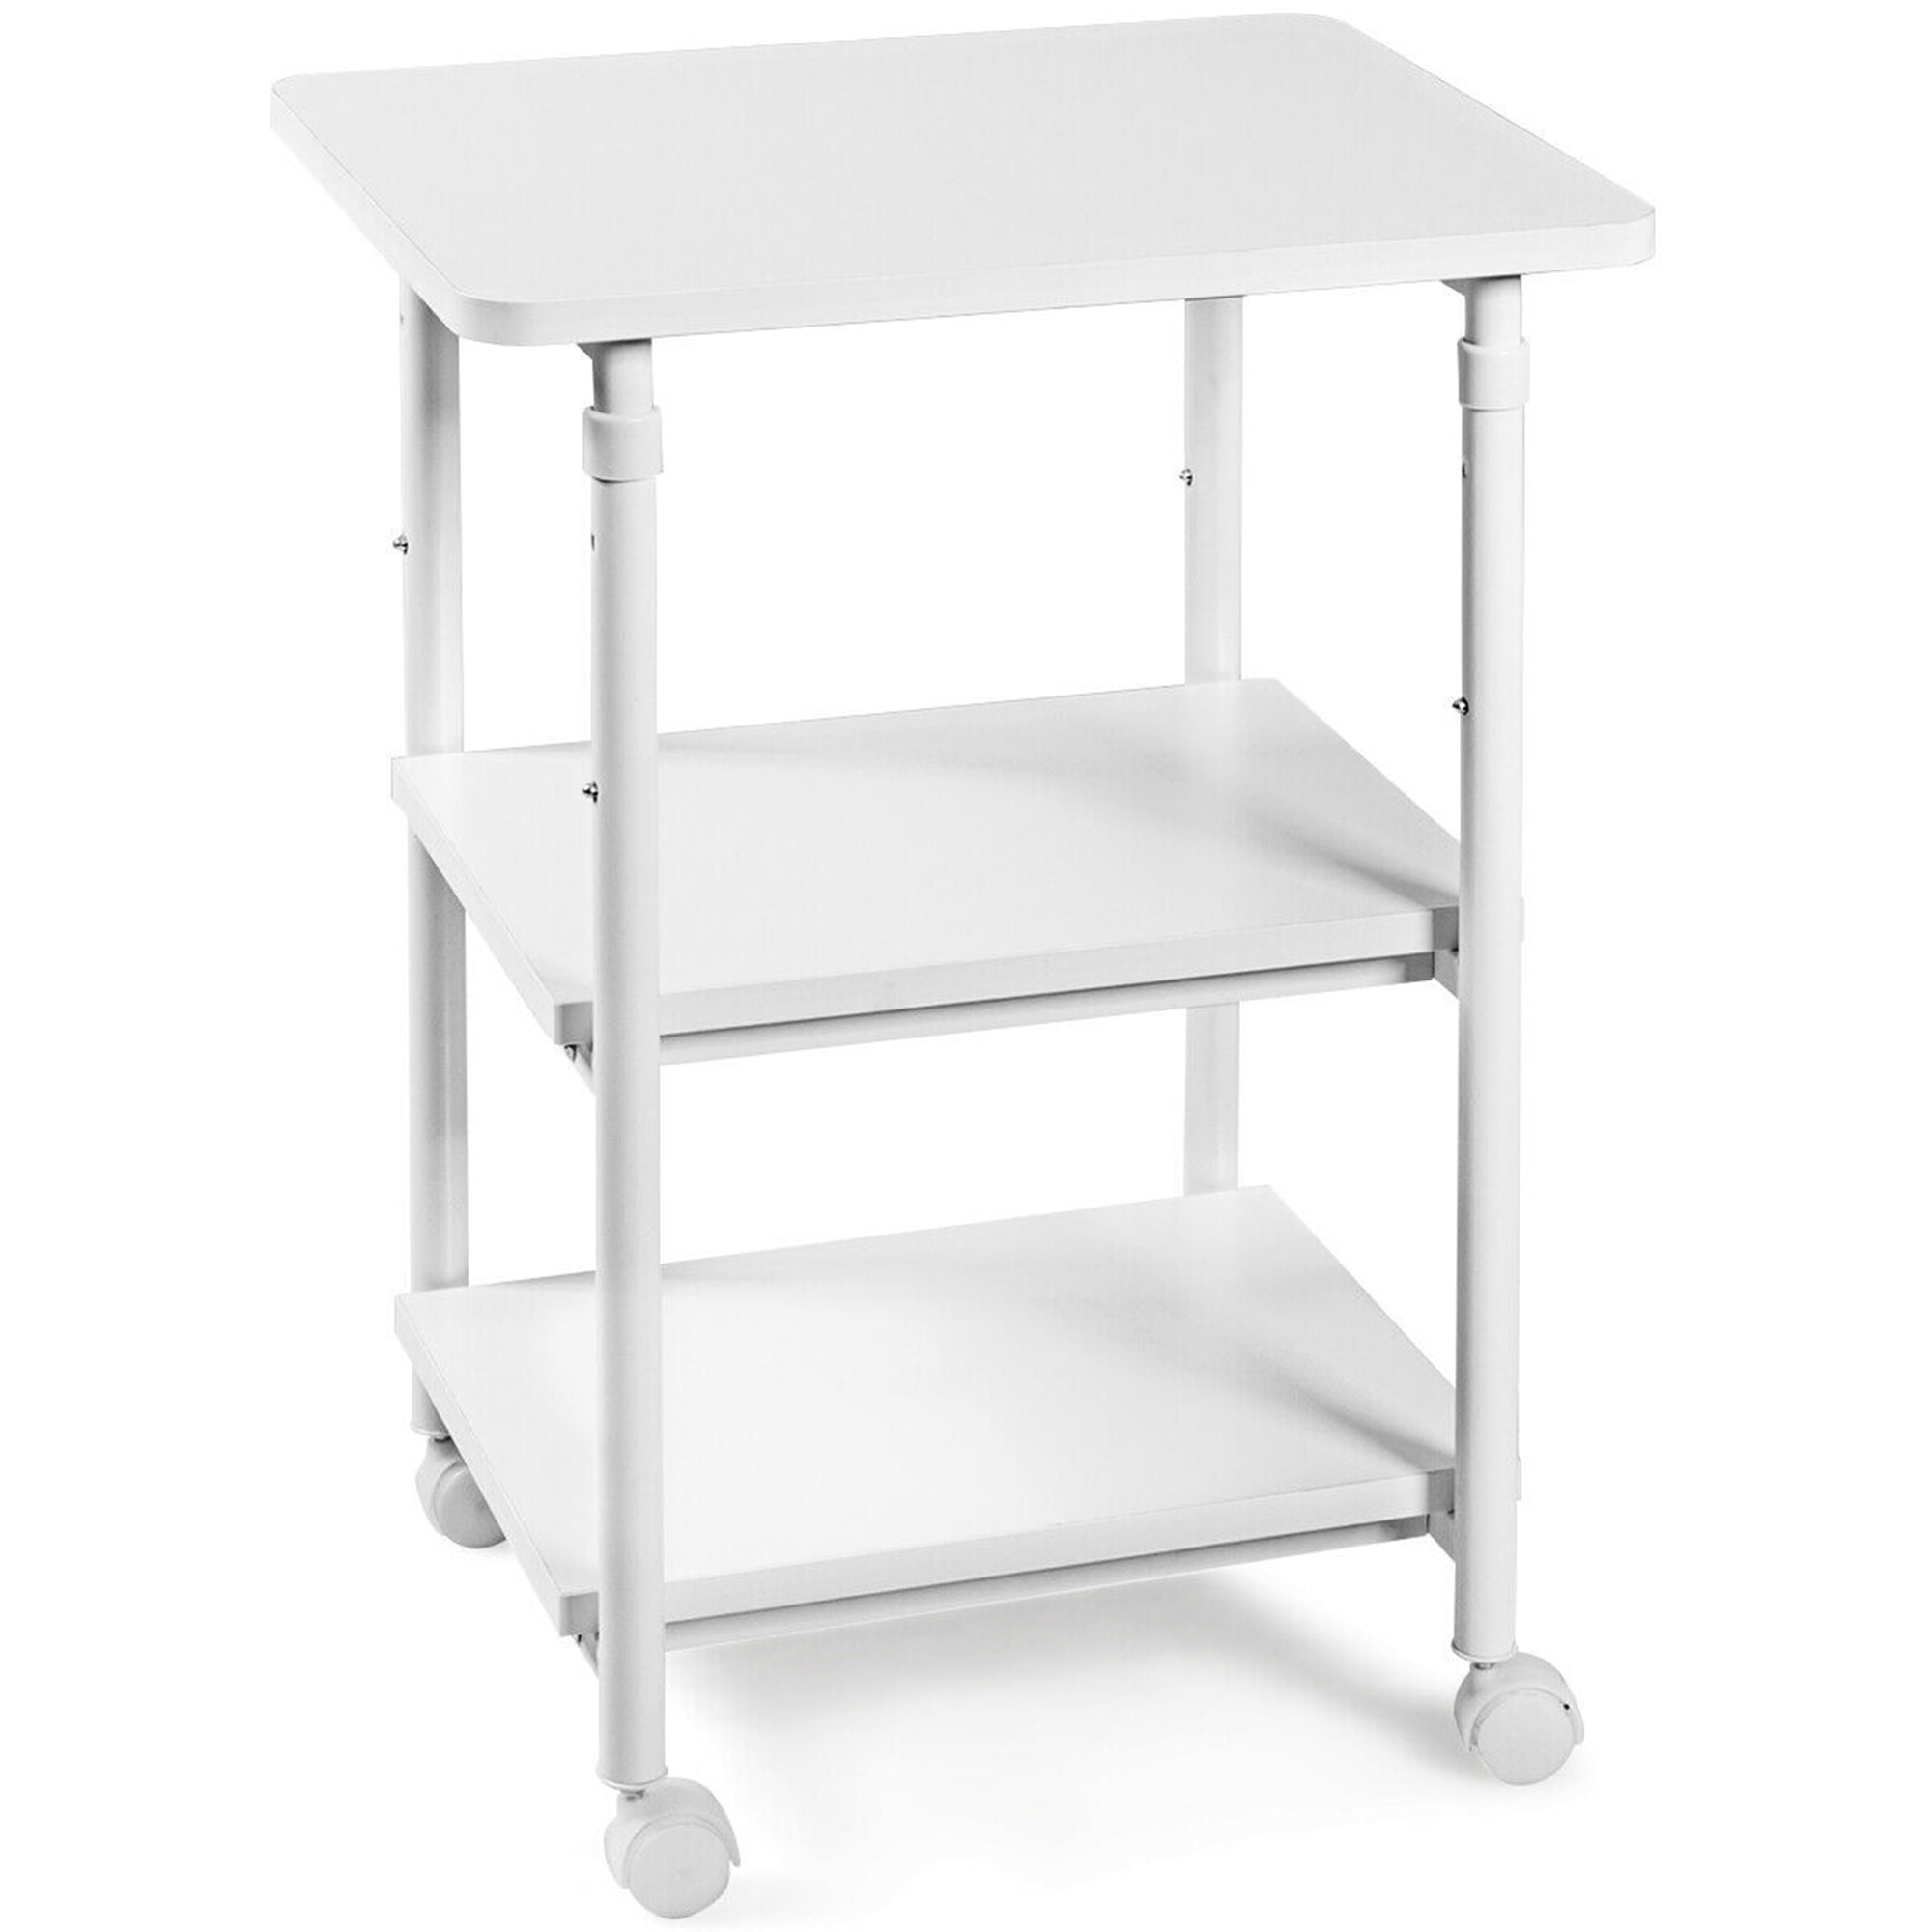 Dropship 3-Tier Mobile Printer Stand; Adjustable Storage Shelf Rack On  Lockable Wheels; Large Tall Printer Table For Home Office Small Spaces  Organization; White to Sell Online at a Lower Price